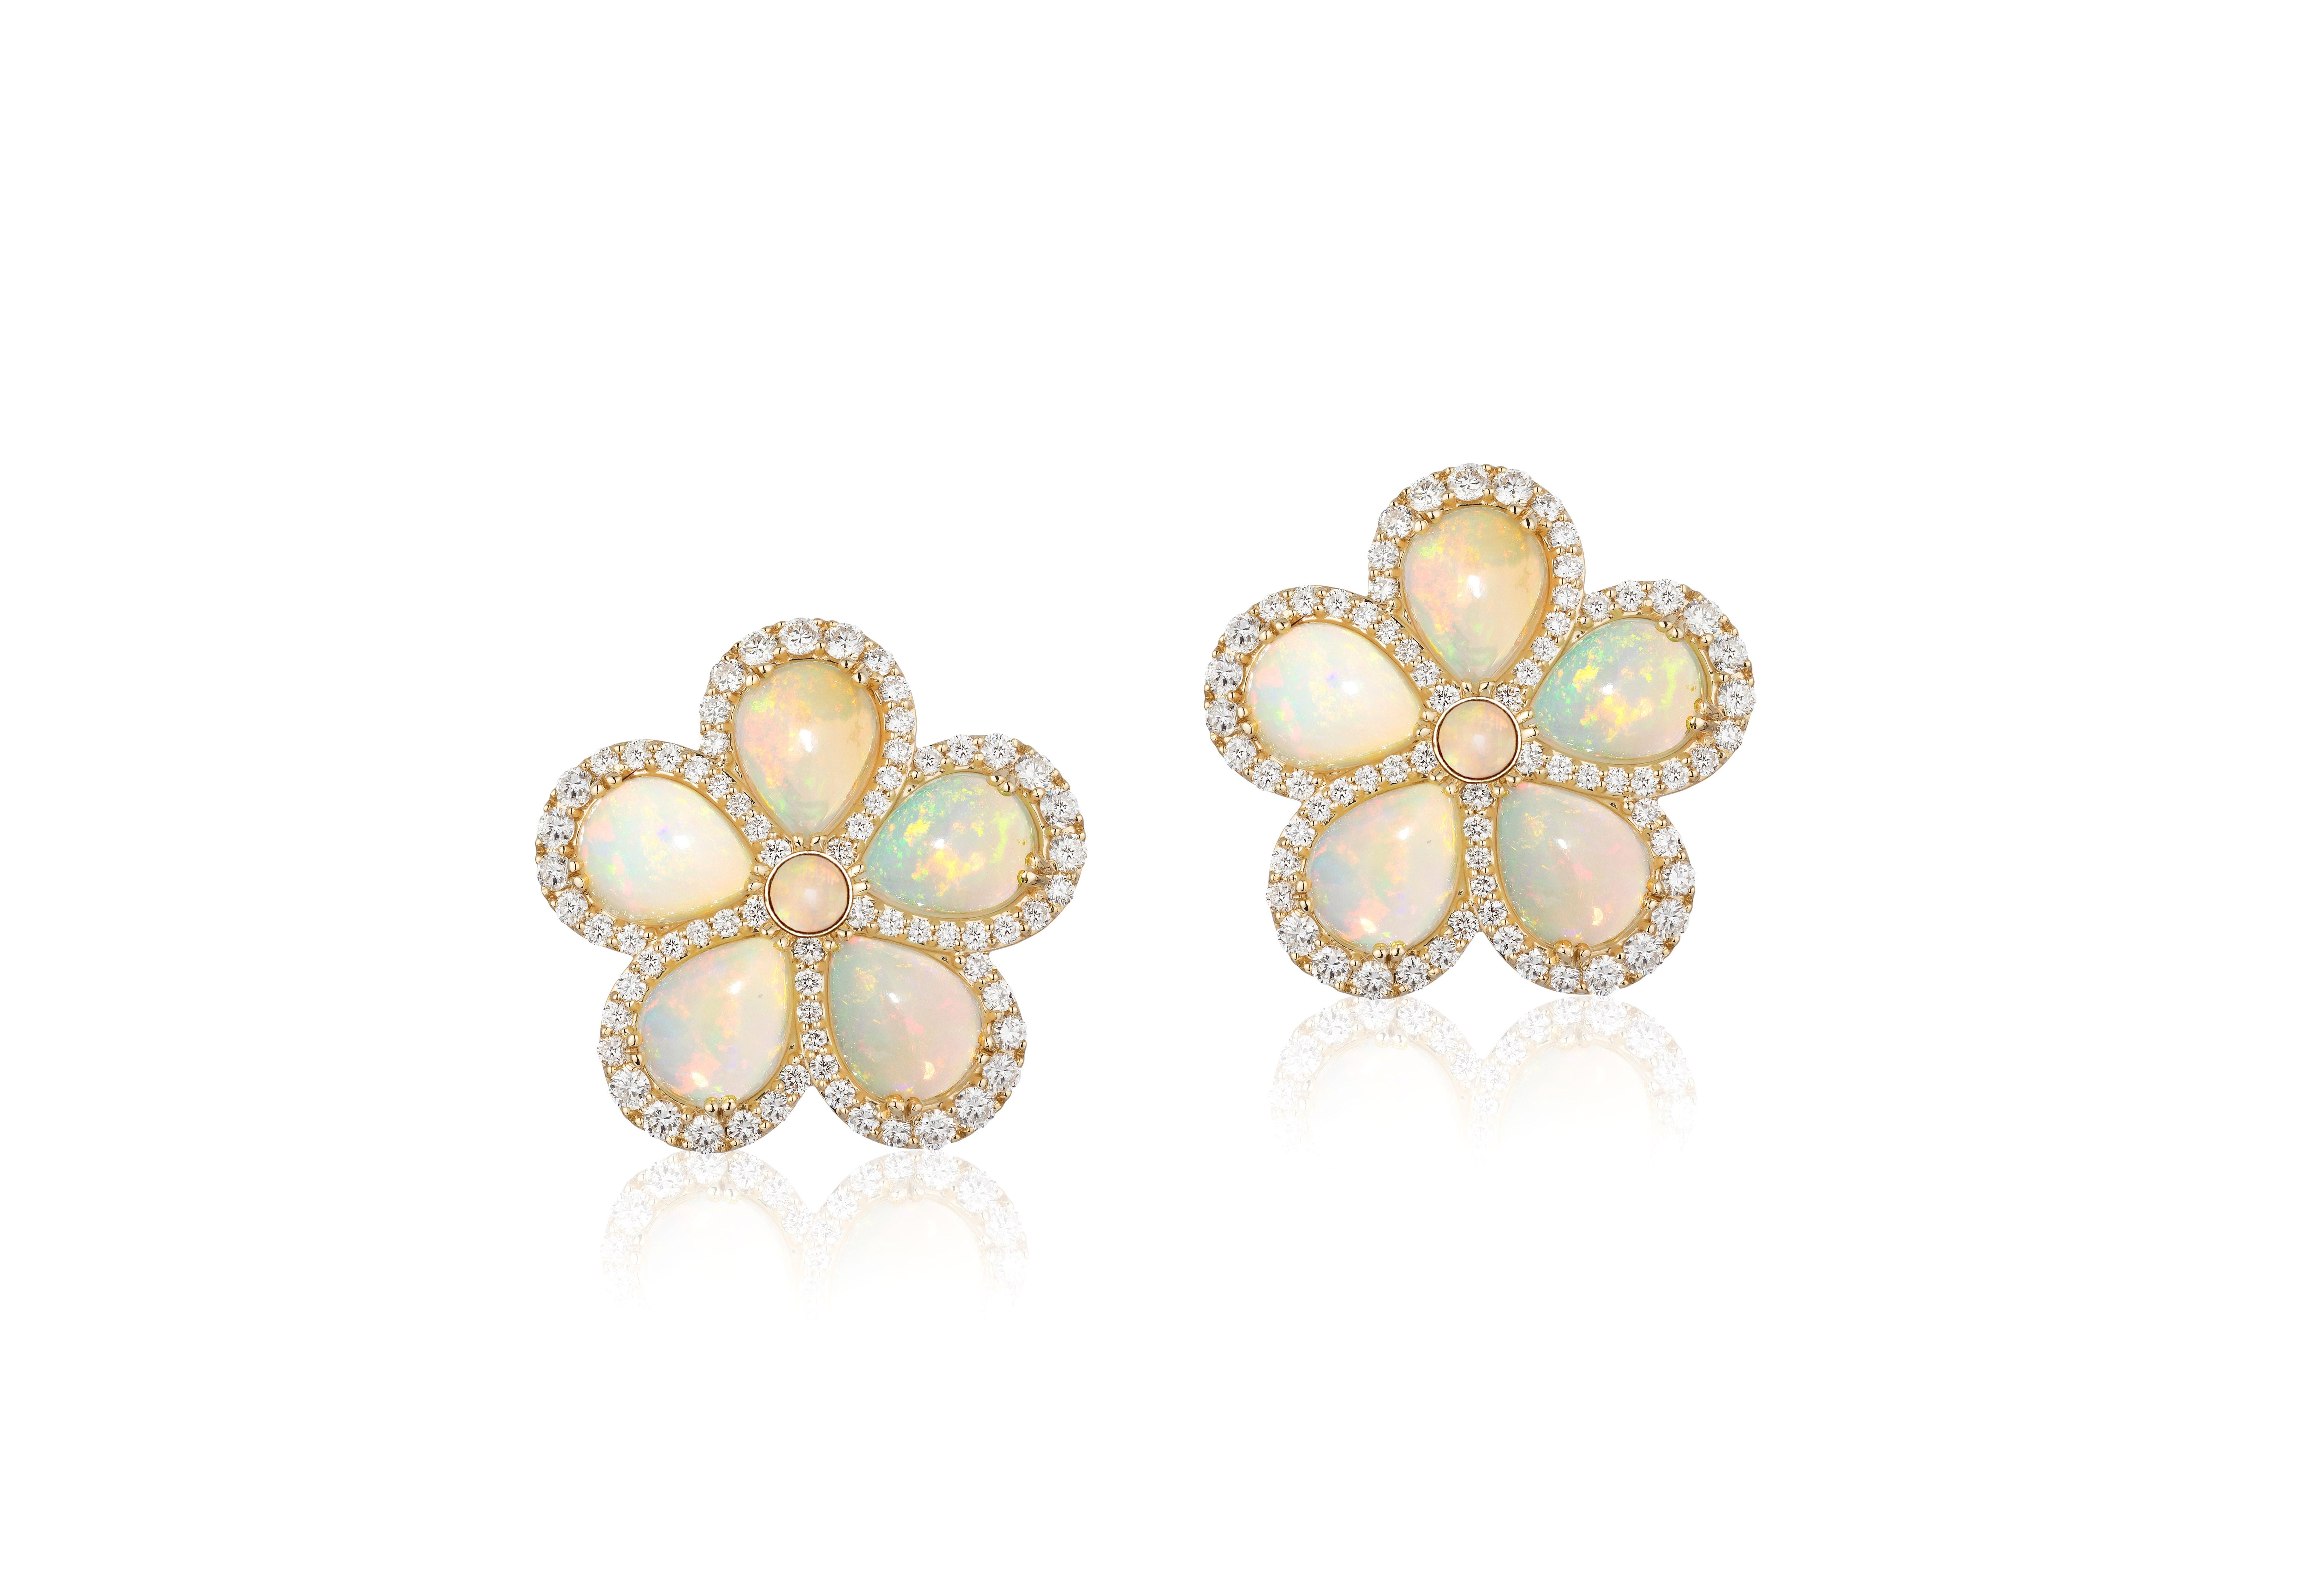  Pear Opal Cluster Earrings with Diamonds in 18k Yellow Gold with Omega Back, from 'G-One' Collection

Stone Size: 9 x 7 mm

Gemstone Weight: Opal- 10.28 Carats

 Diamond: G-H / VS, Approx Wt: 1.48 Carats.